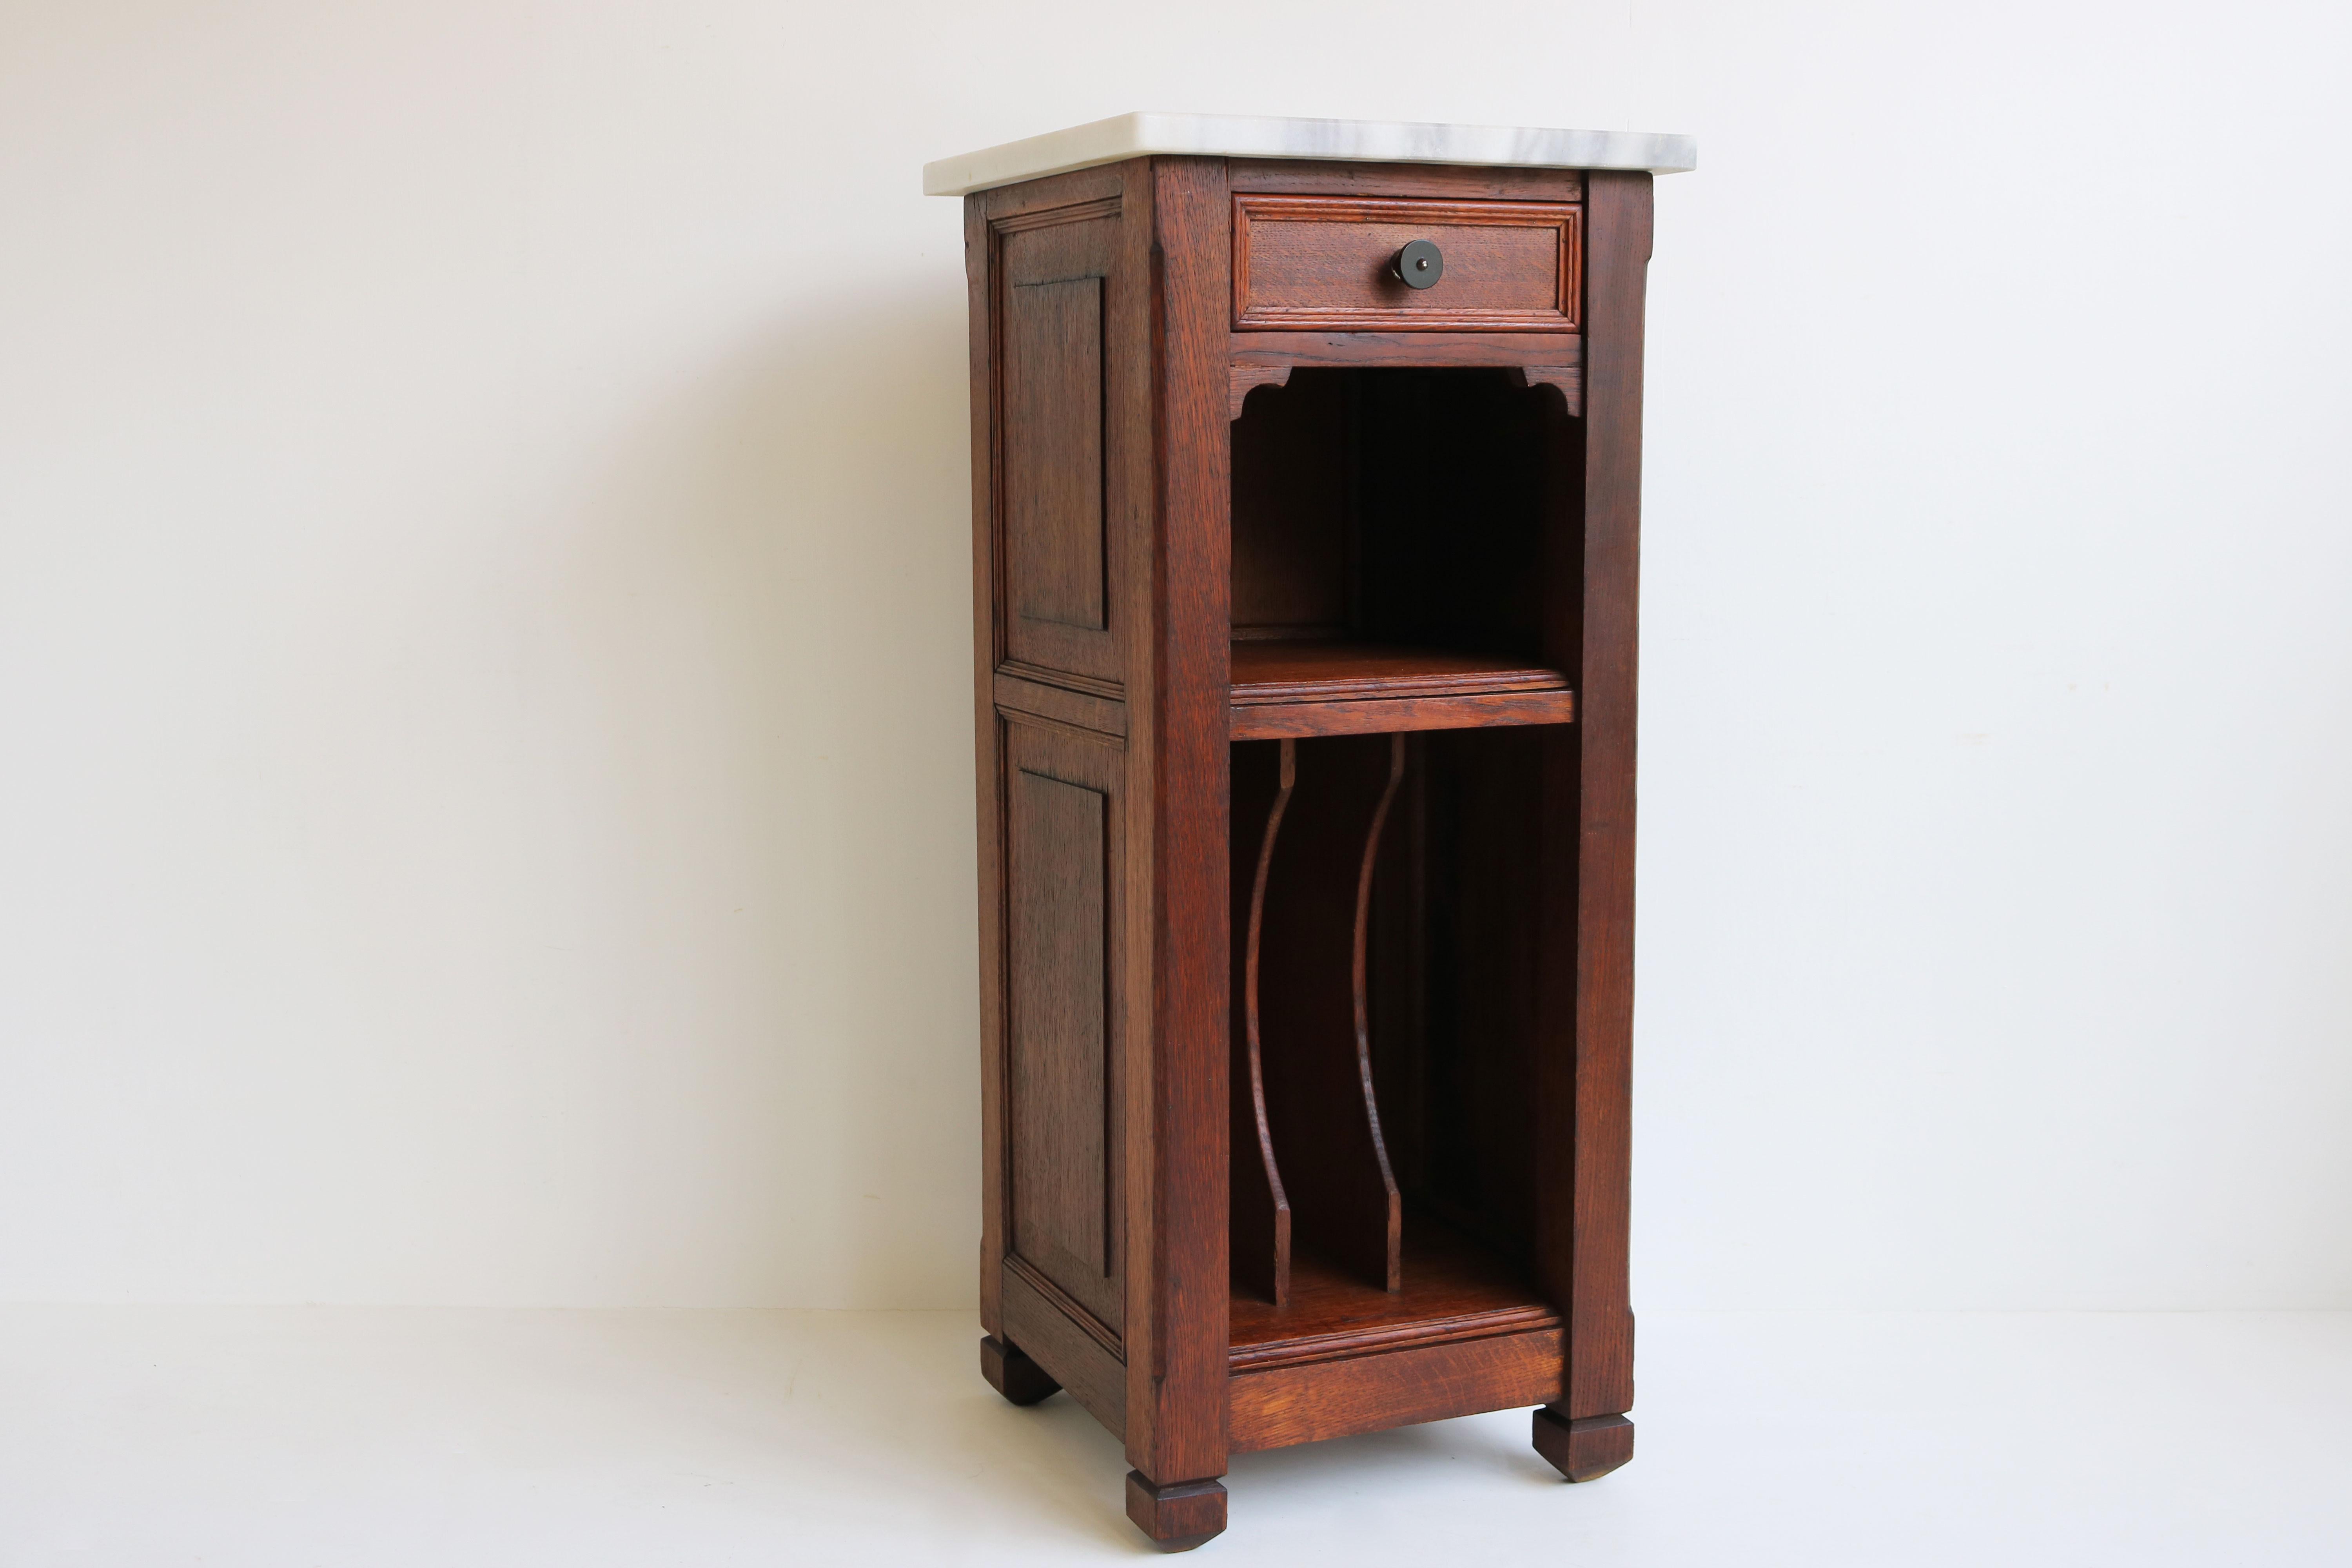 Gorgeous French Art Deco nightstand / Record cabinet from the 1920s in solid oak with rare stripe marble from Greece. 
The cabinet has 1 drawer, 1 open compartment and 1 record / book compartment on the bottom side. 
The cabinet is finished on all